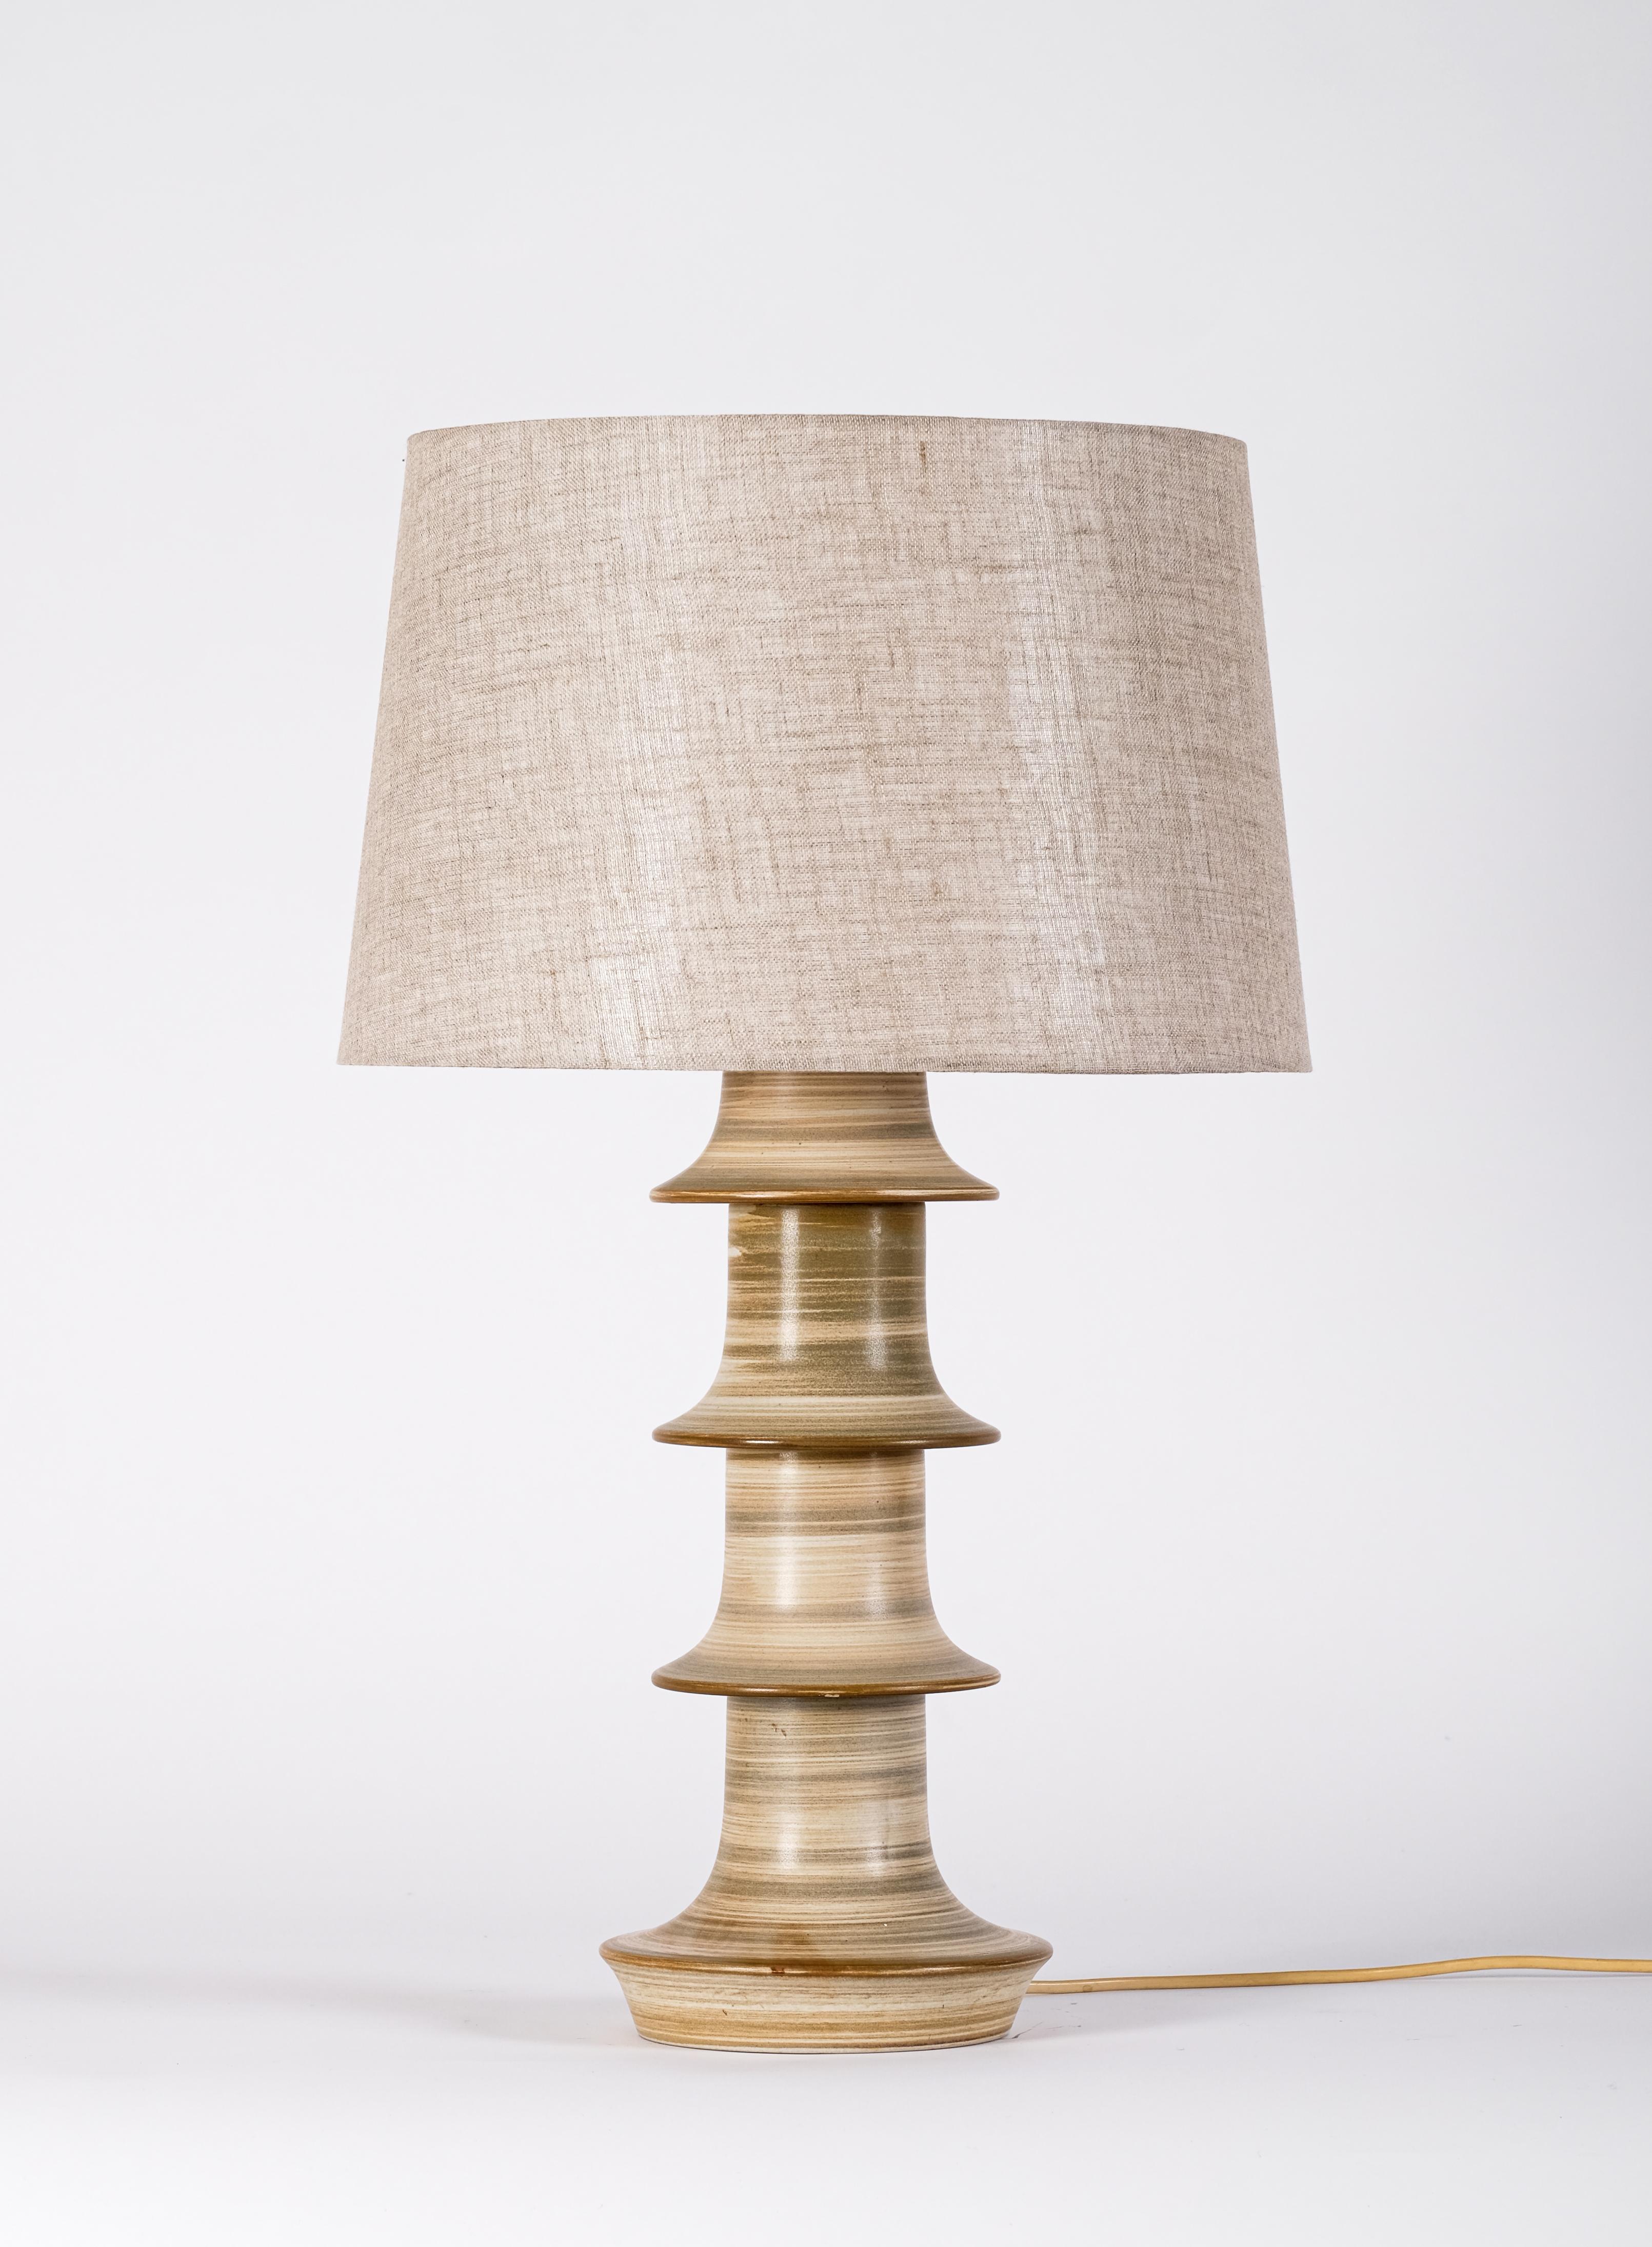 Mid-20th Century Ceramic Table Lamp by Höganäs, Sweden, 1950s For Sale